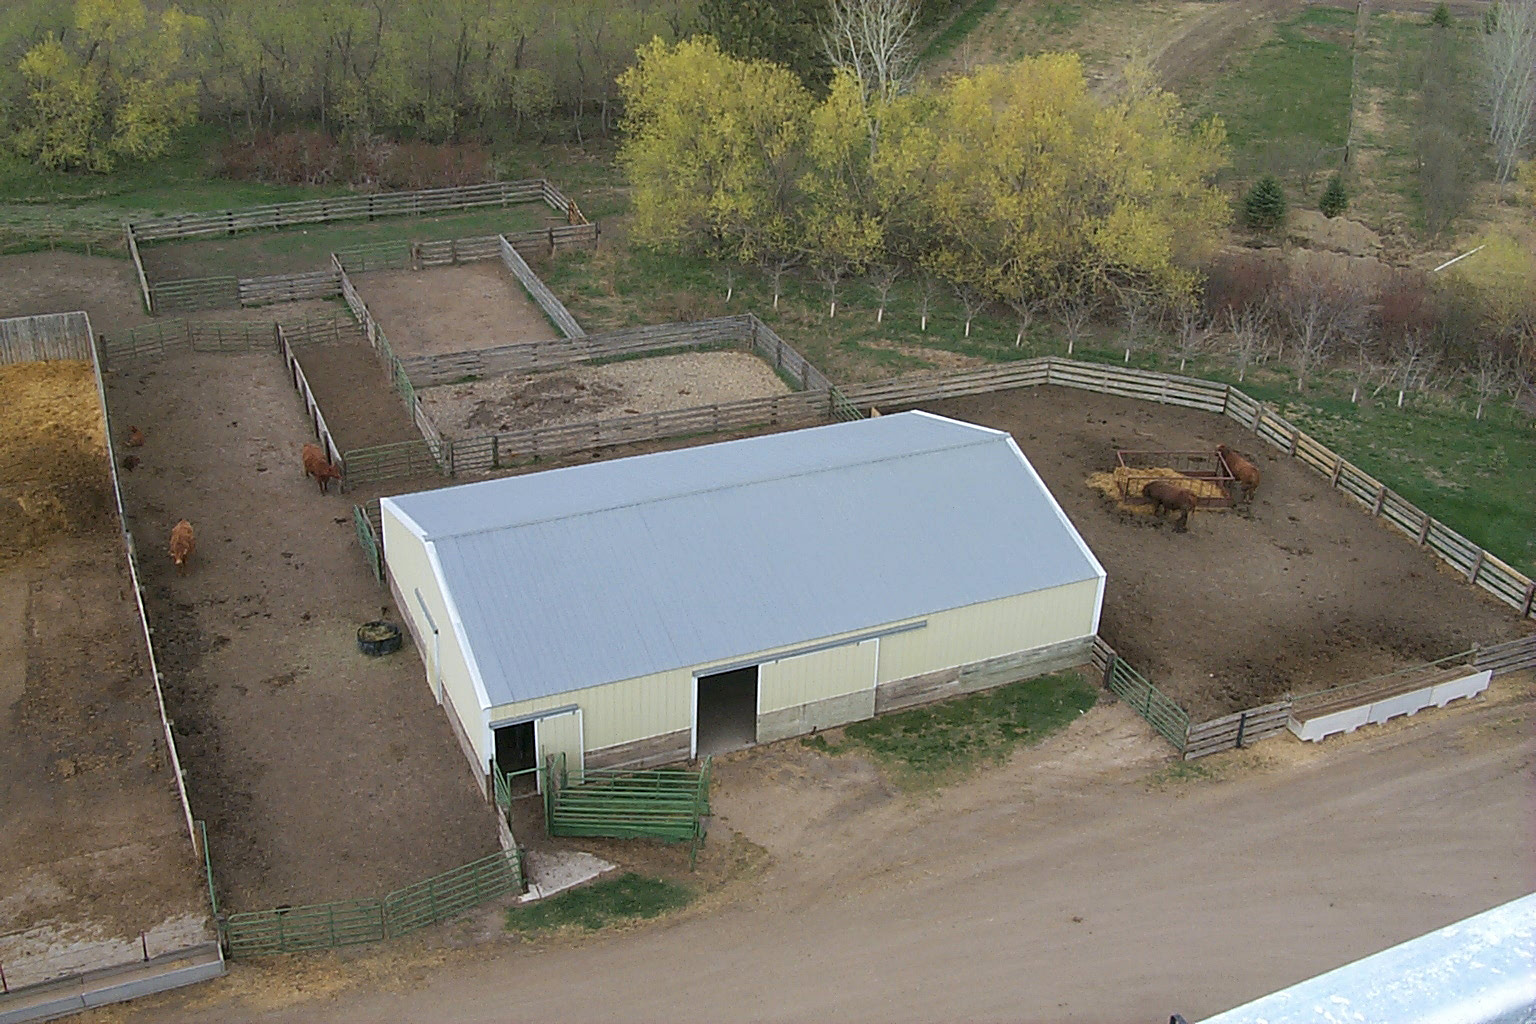 Overhead view of the north barn with outside holding pens, alleys and loading chute